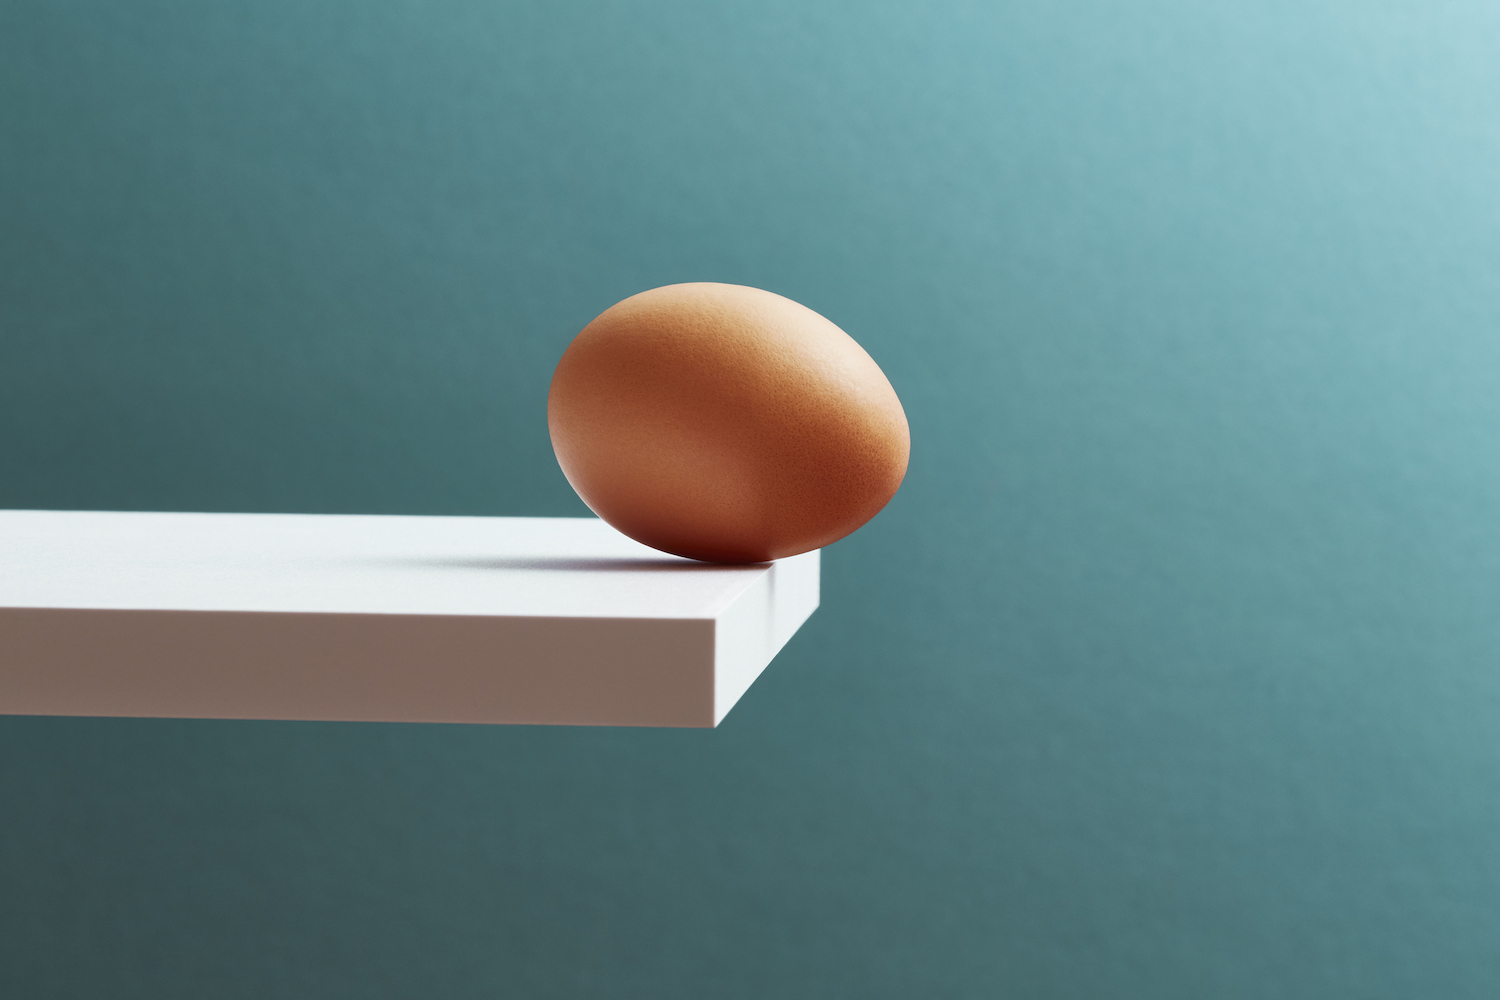 An egg teetering on the edge of a plank